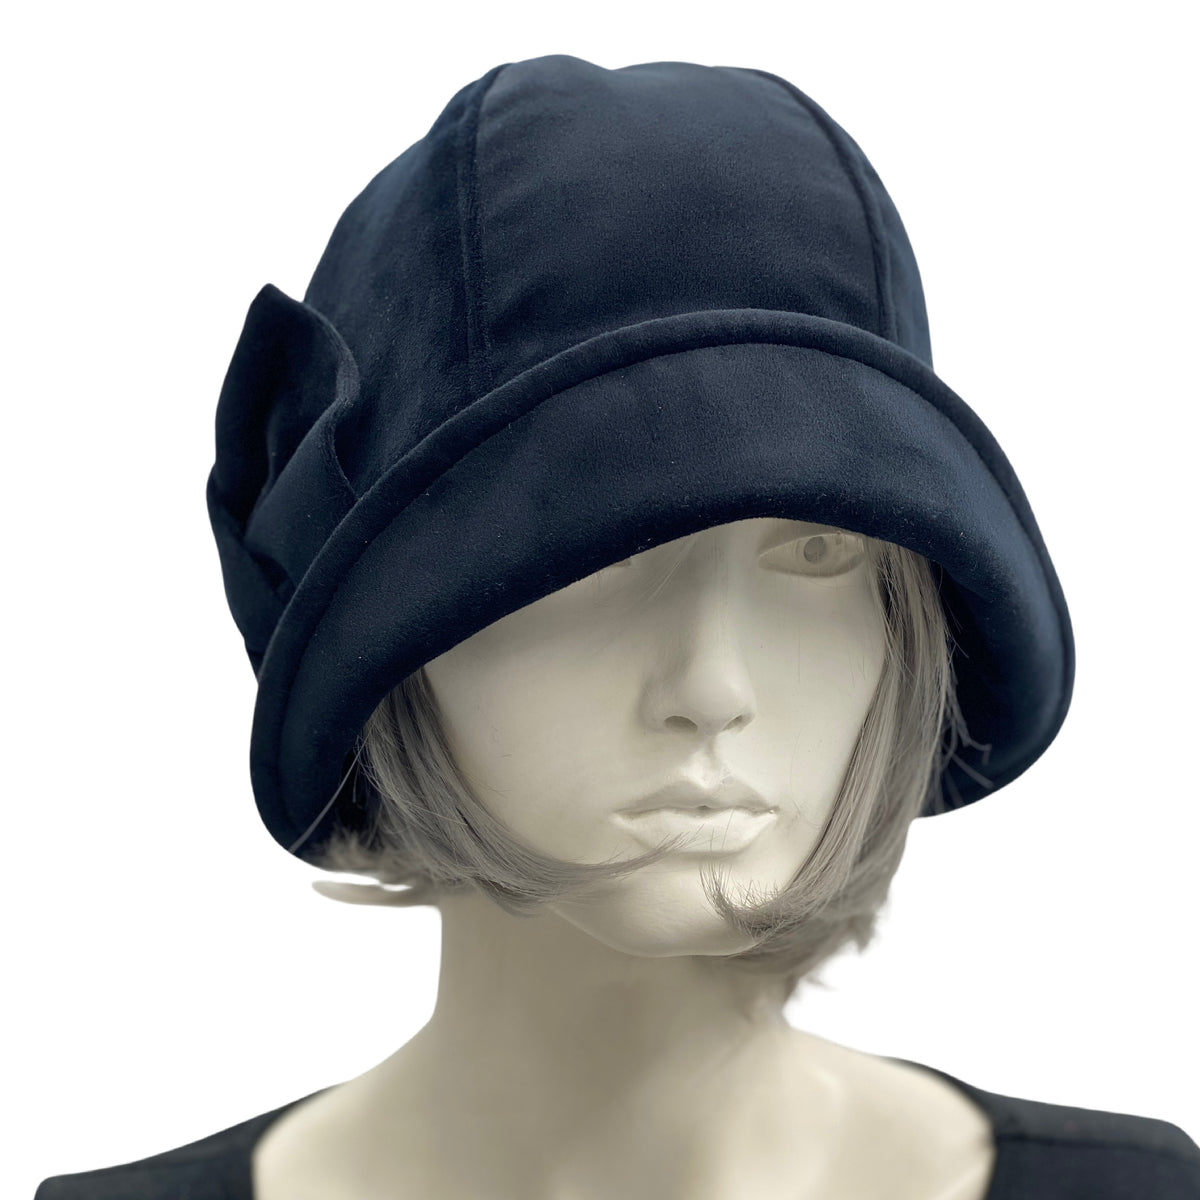 Velvet 1920's Style Cloche Hat with Bow in Several Color Options | The